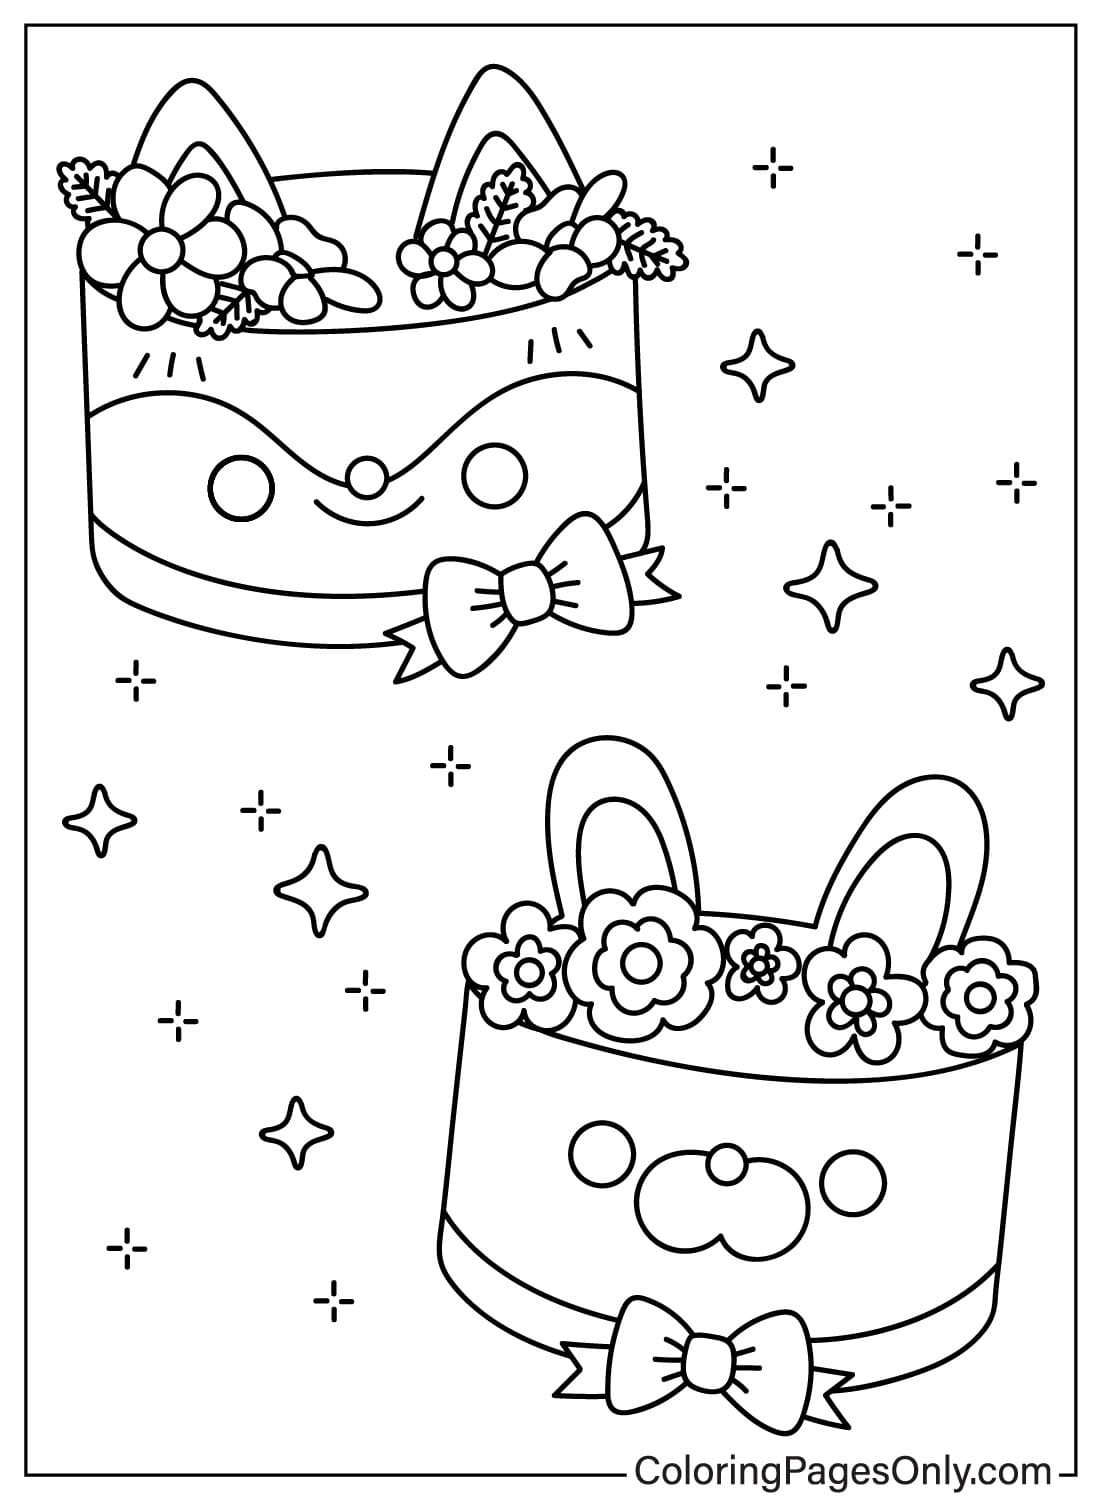 Cute Birthday Cake Coloring Page from Birthday Cake